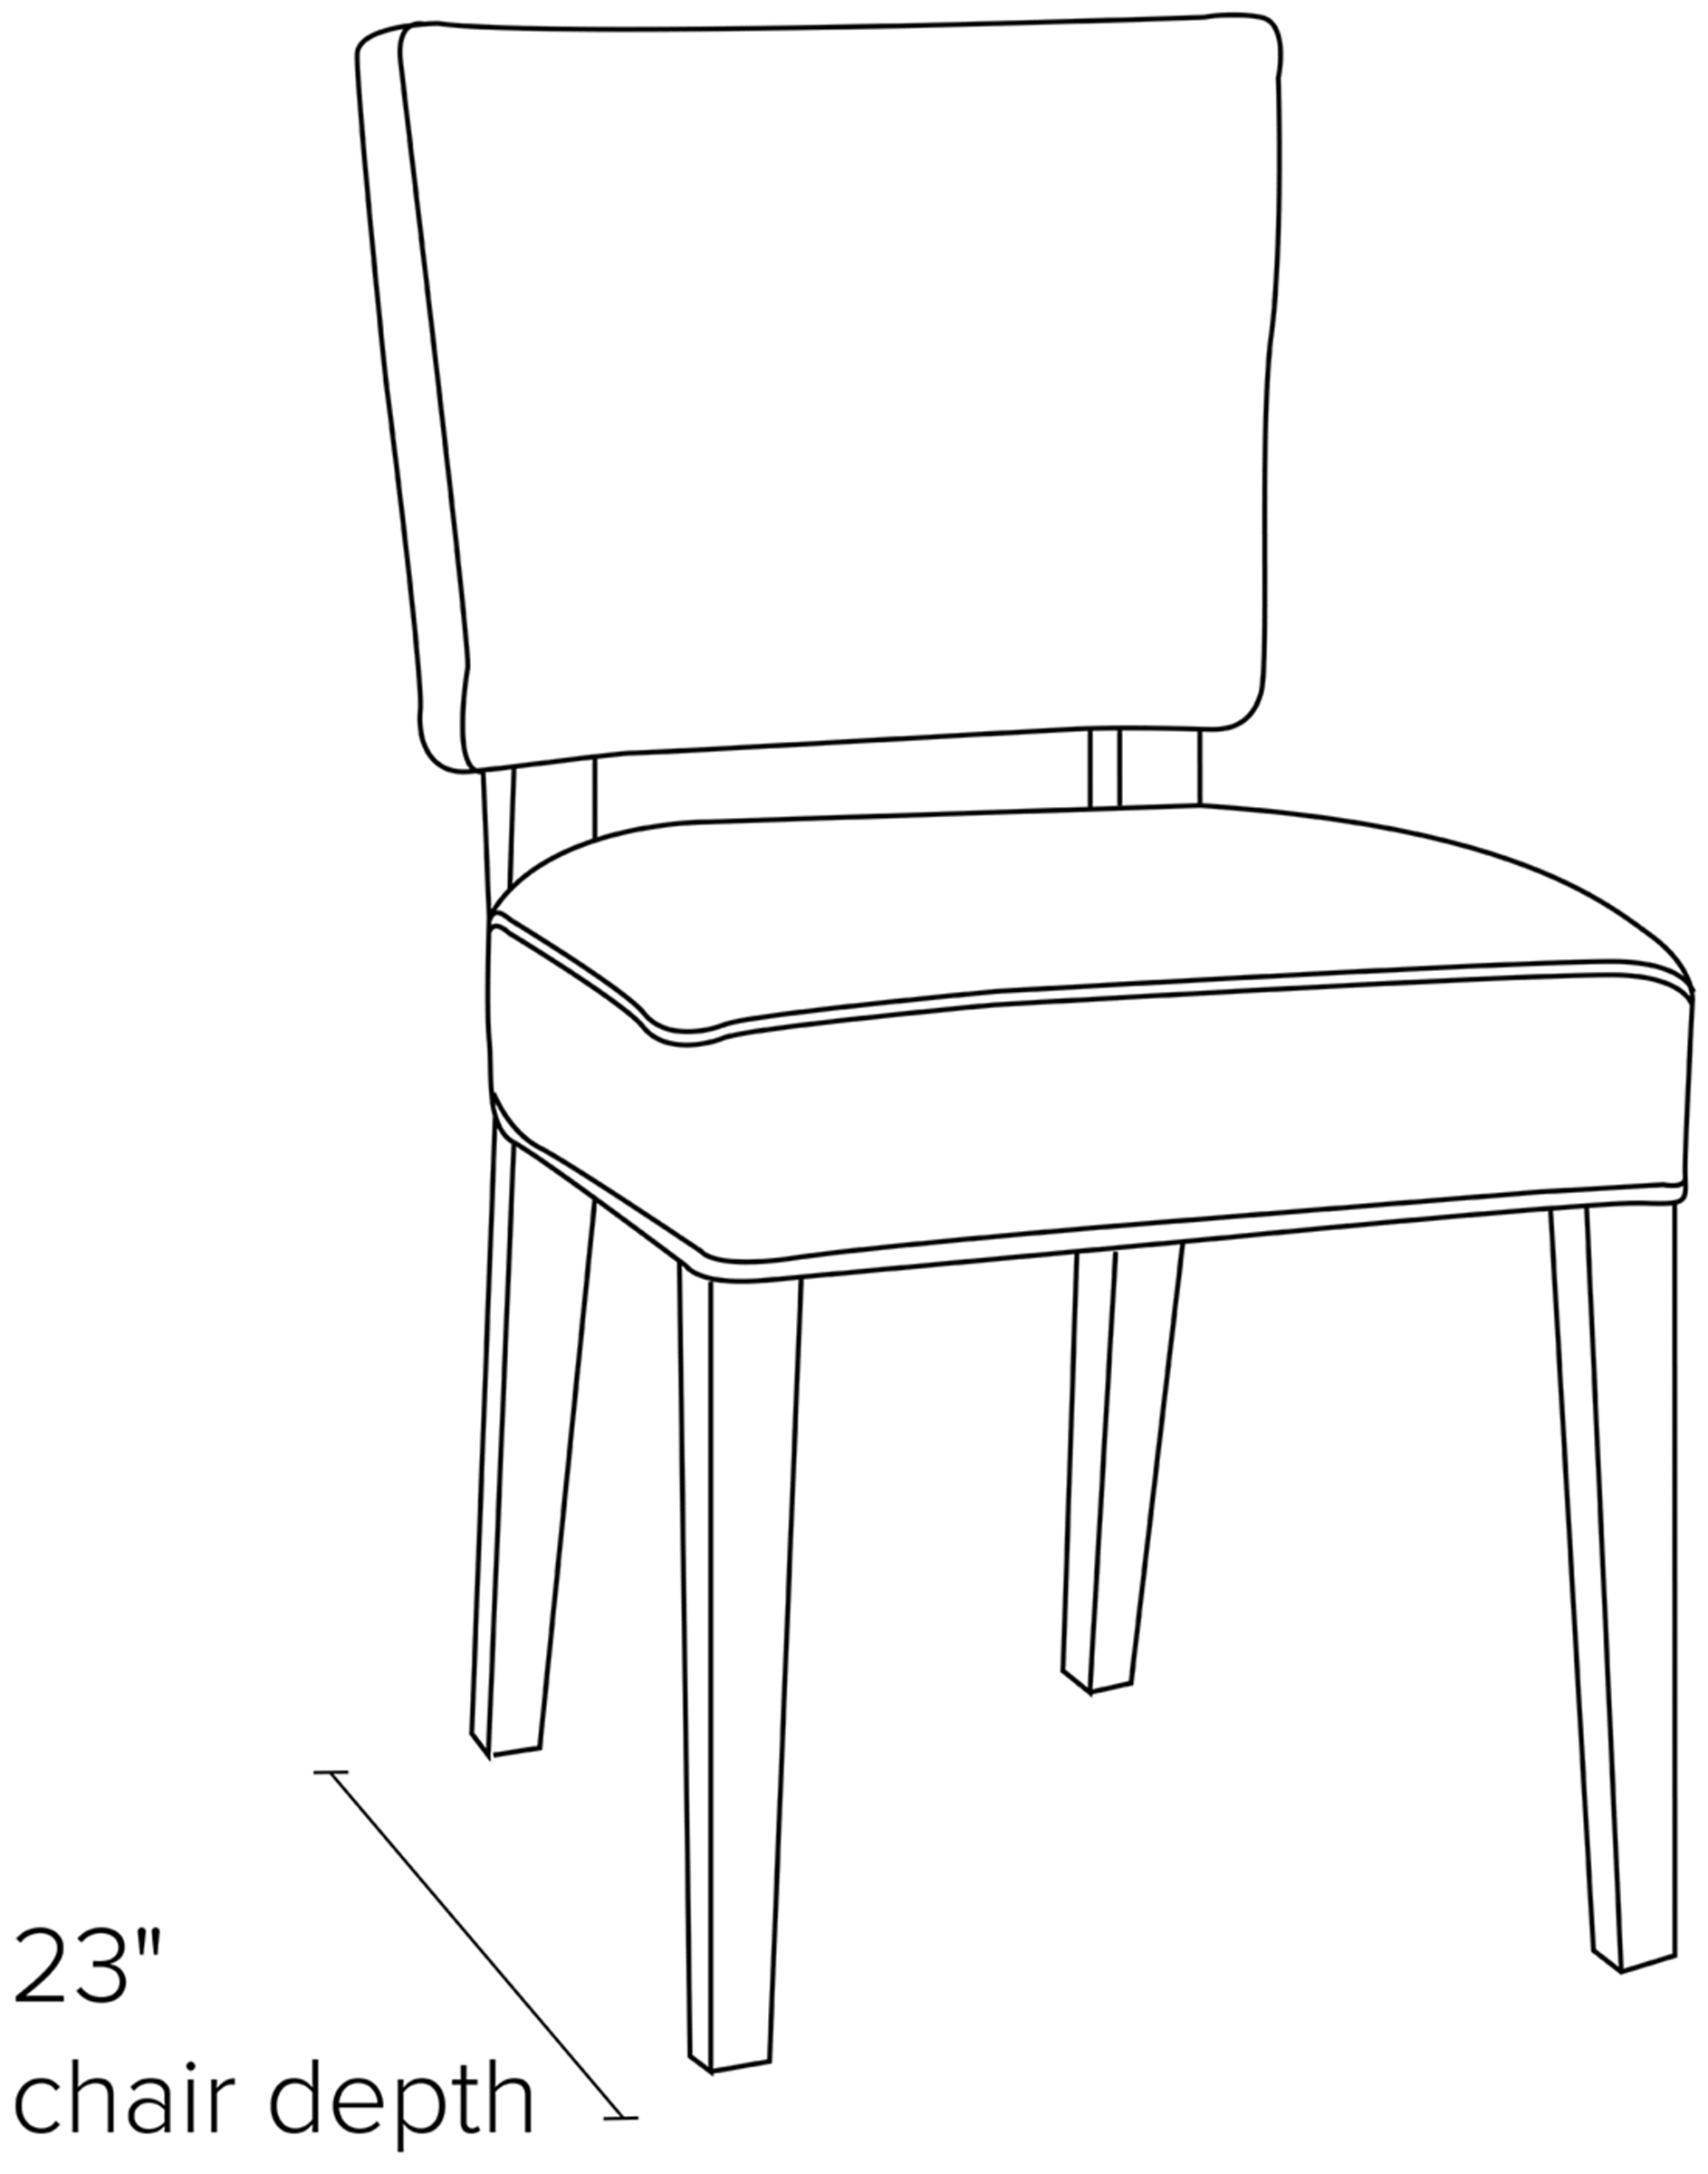 Side view dimension illustration of Georgia side chair.